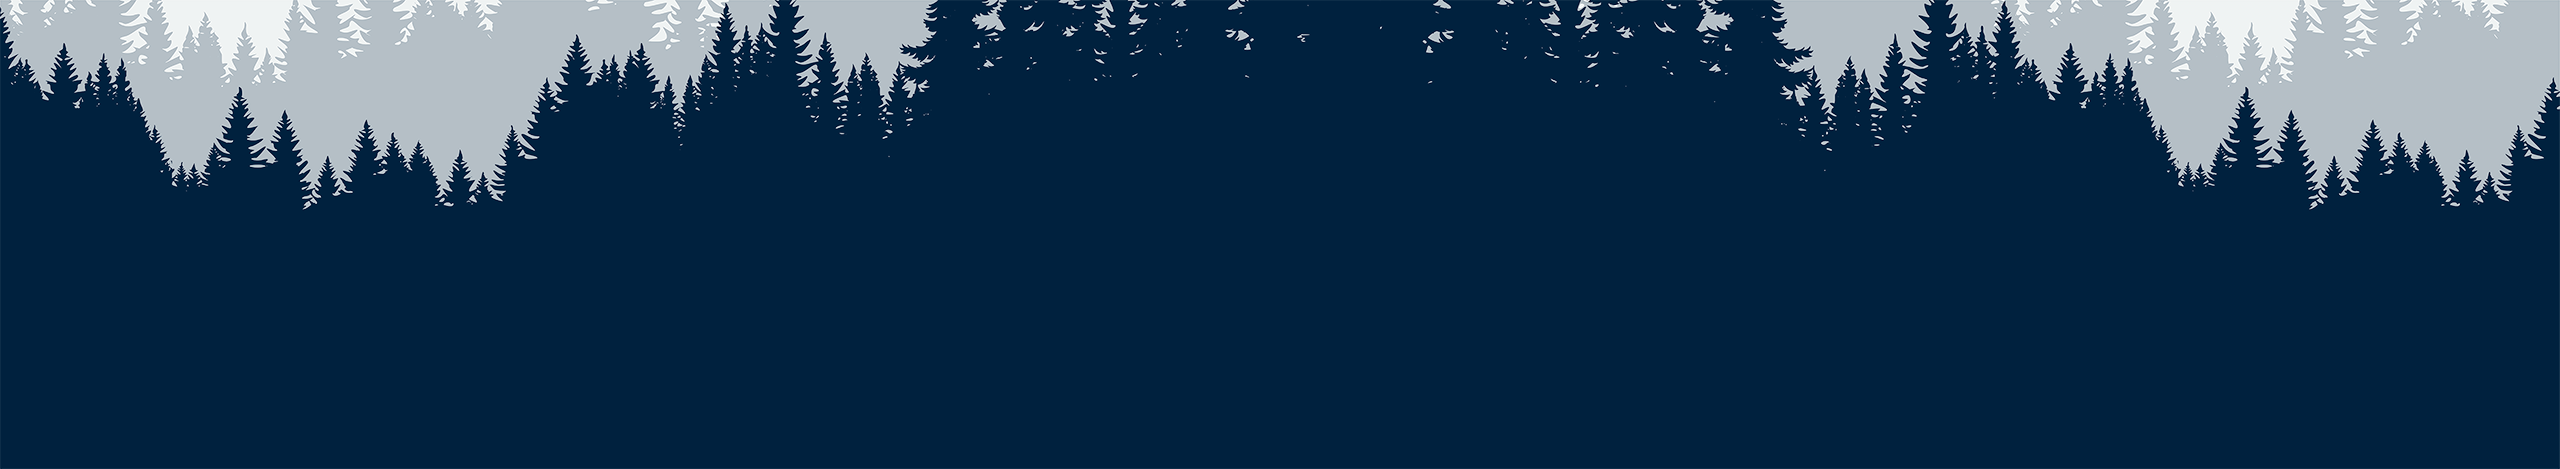 Navy blue tree graphic background